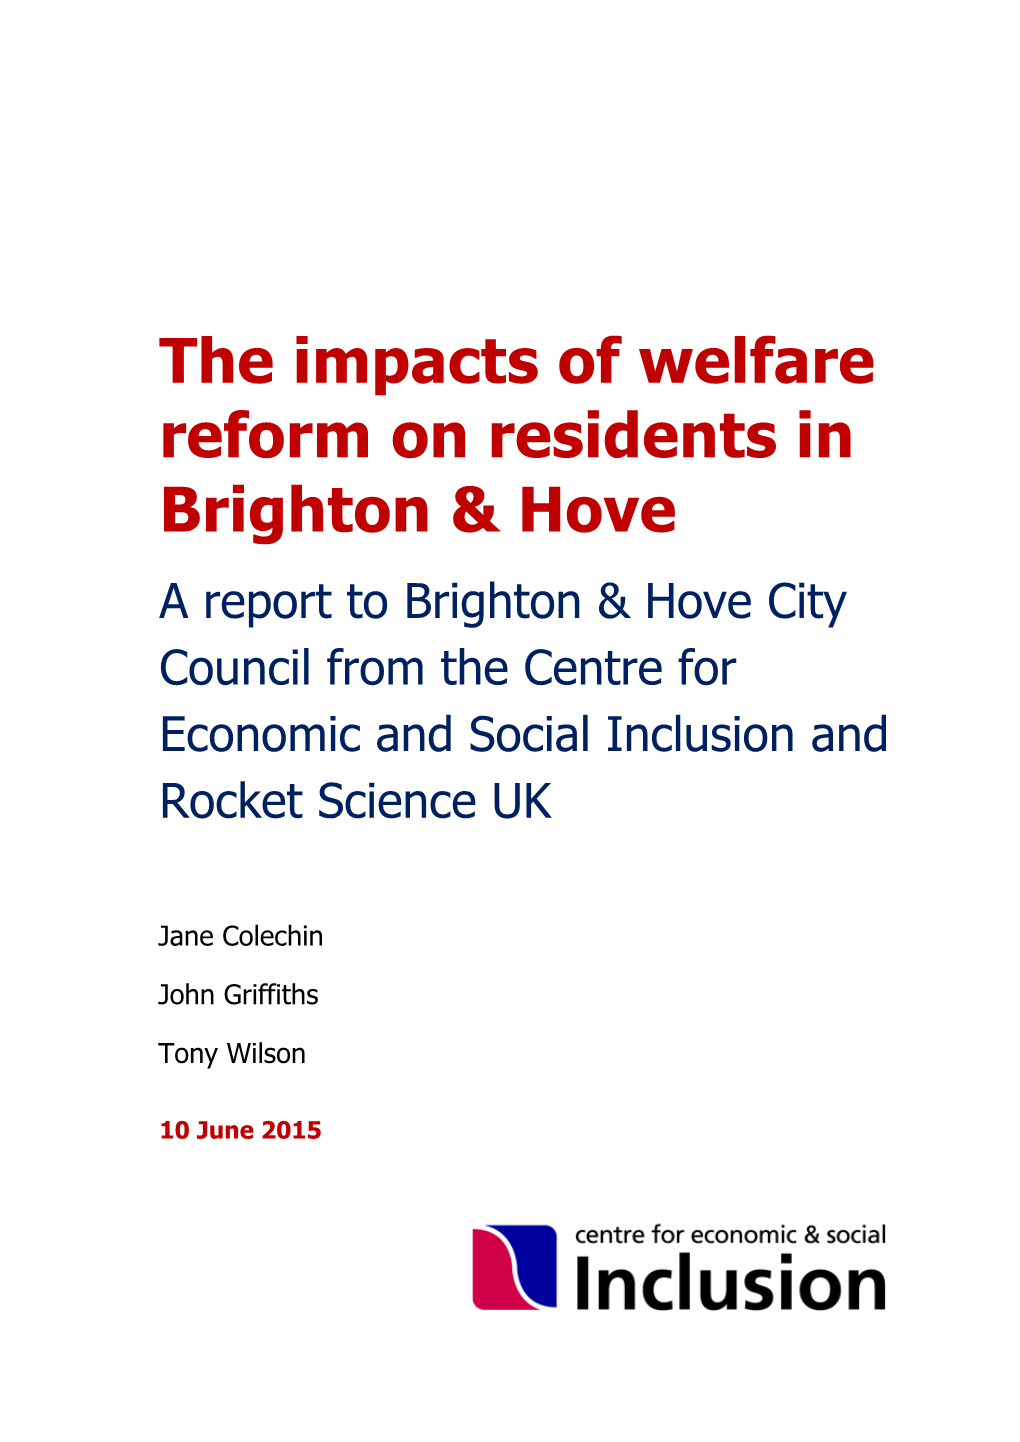 The Impacts of Welfare Reform on Residents in Brighton & Hove